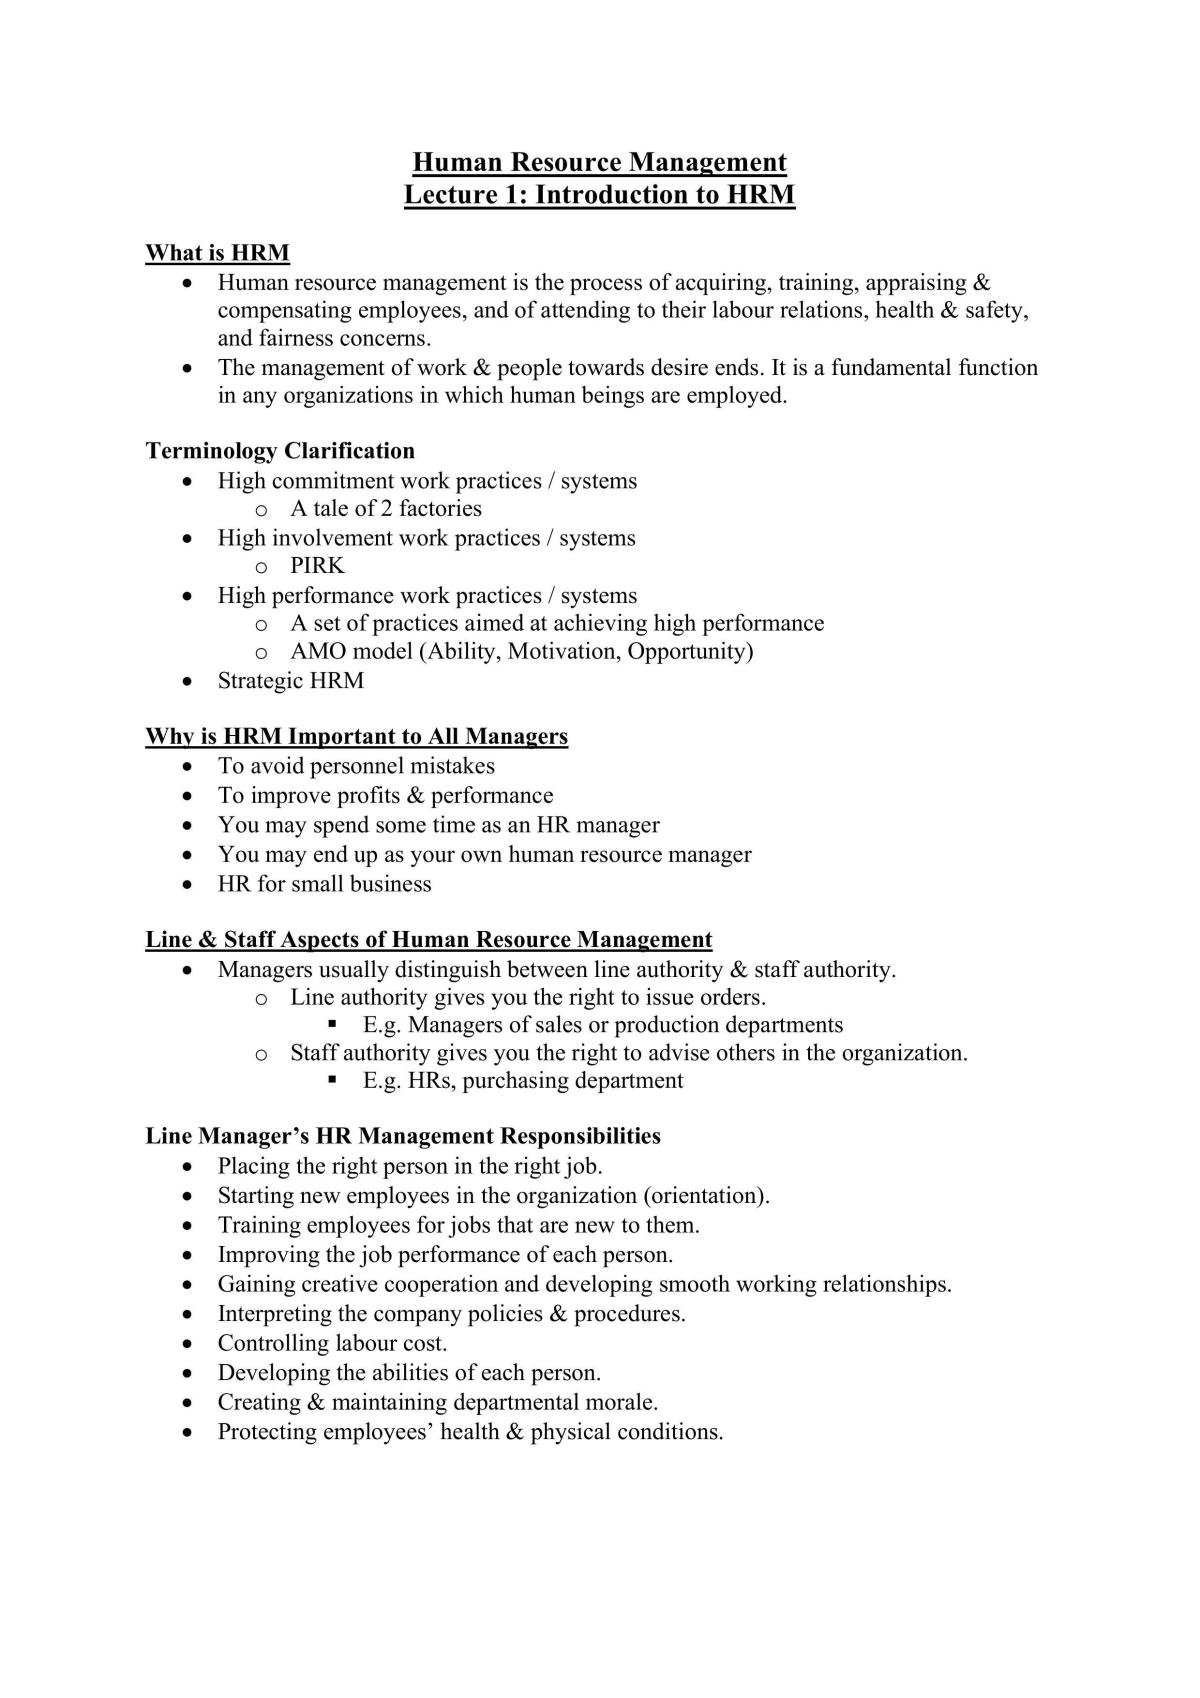 Human Resource Management notes - Page 1